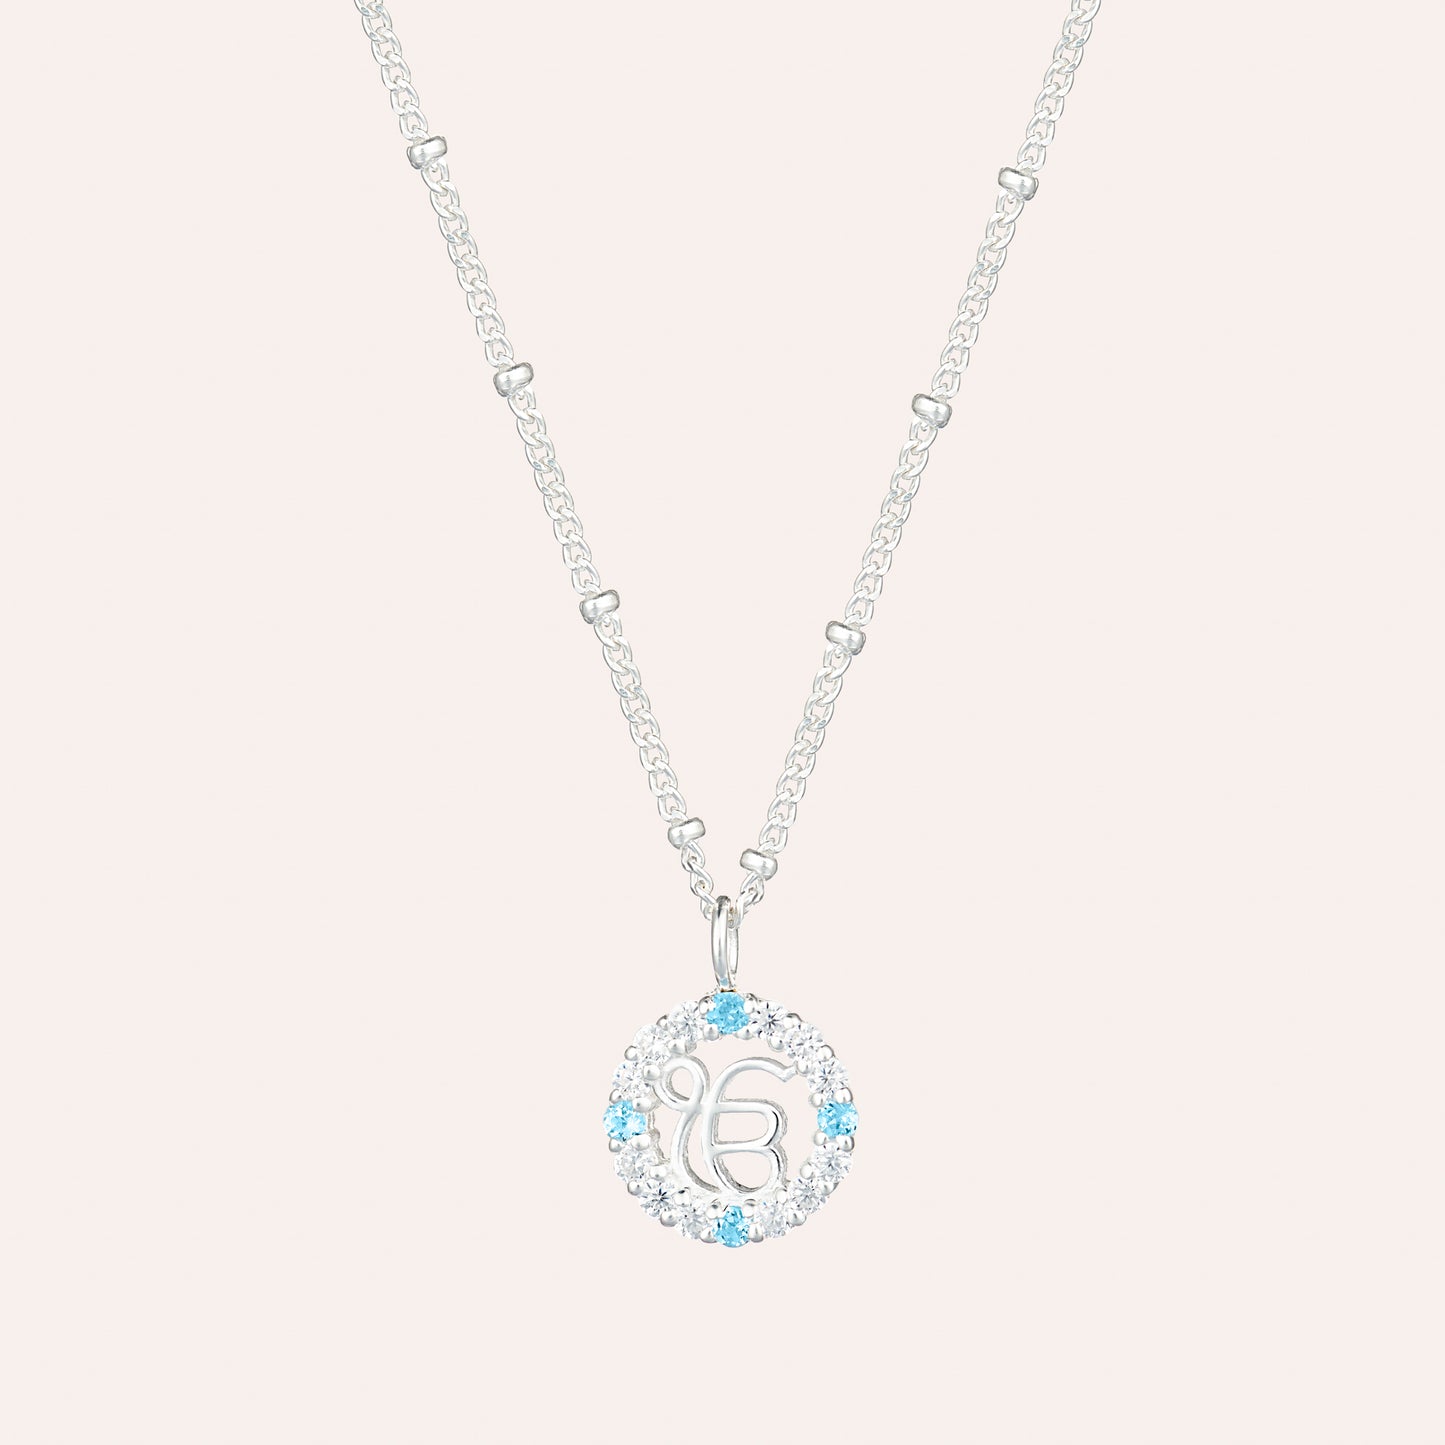 Circle of Light Necklace with Blue Topaz and Cubic Zirconia Pendant